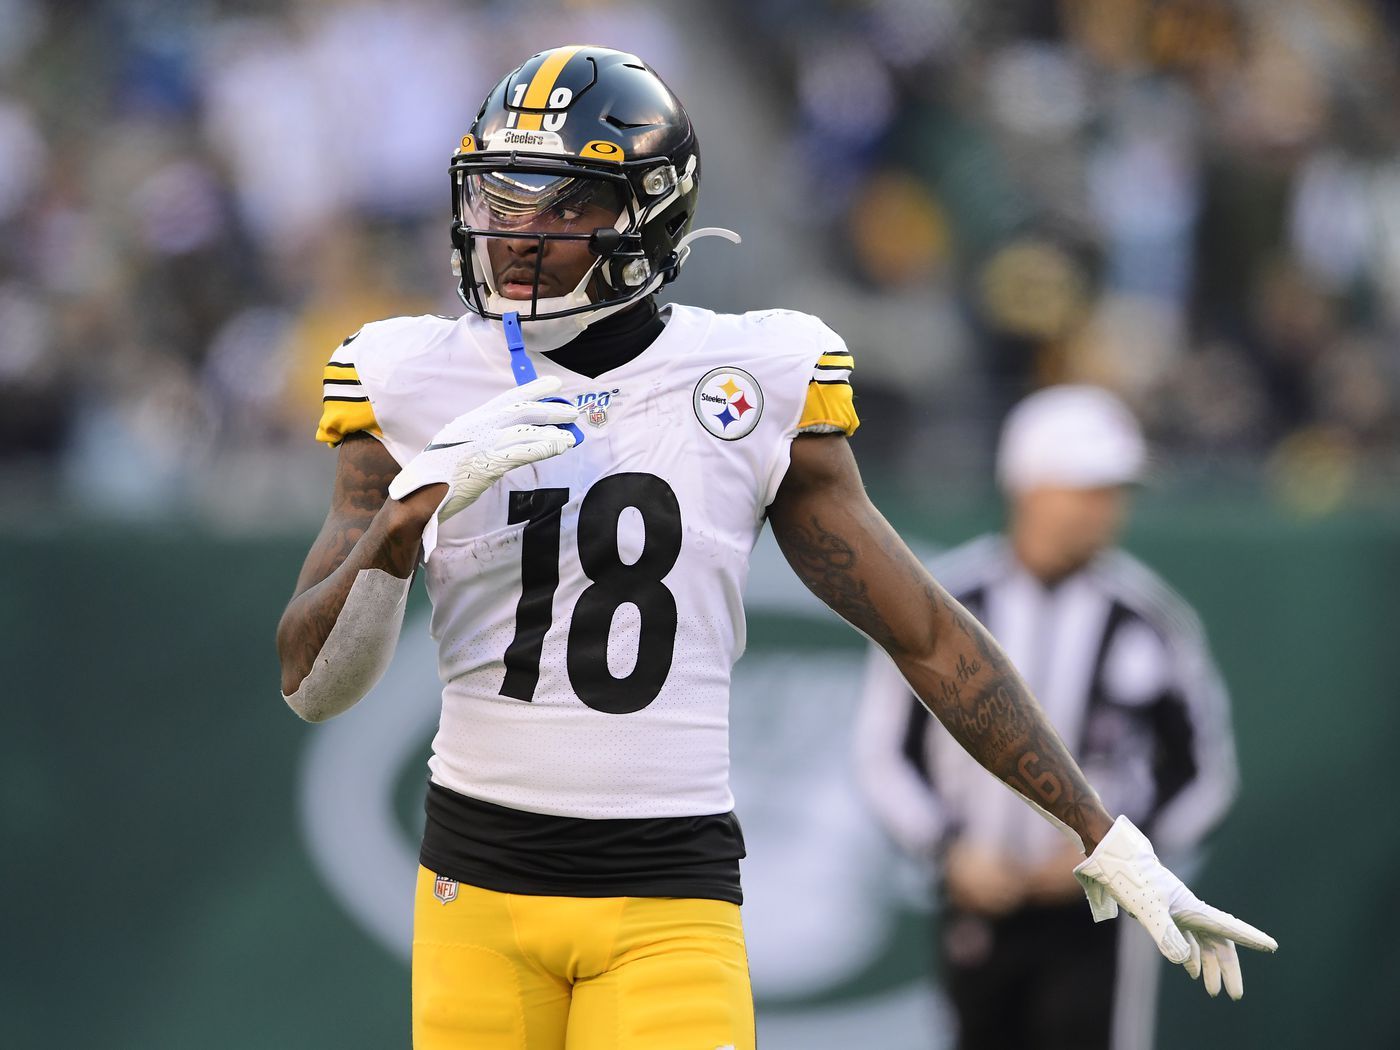 Injury Report: Diontae Johnson misses practice Thursday the Steel Curtain